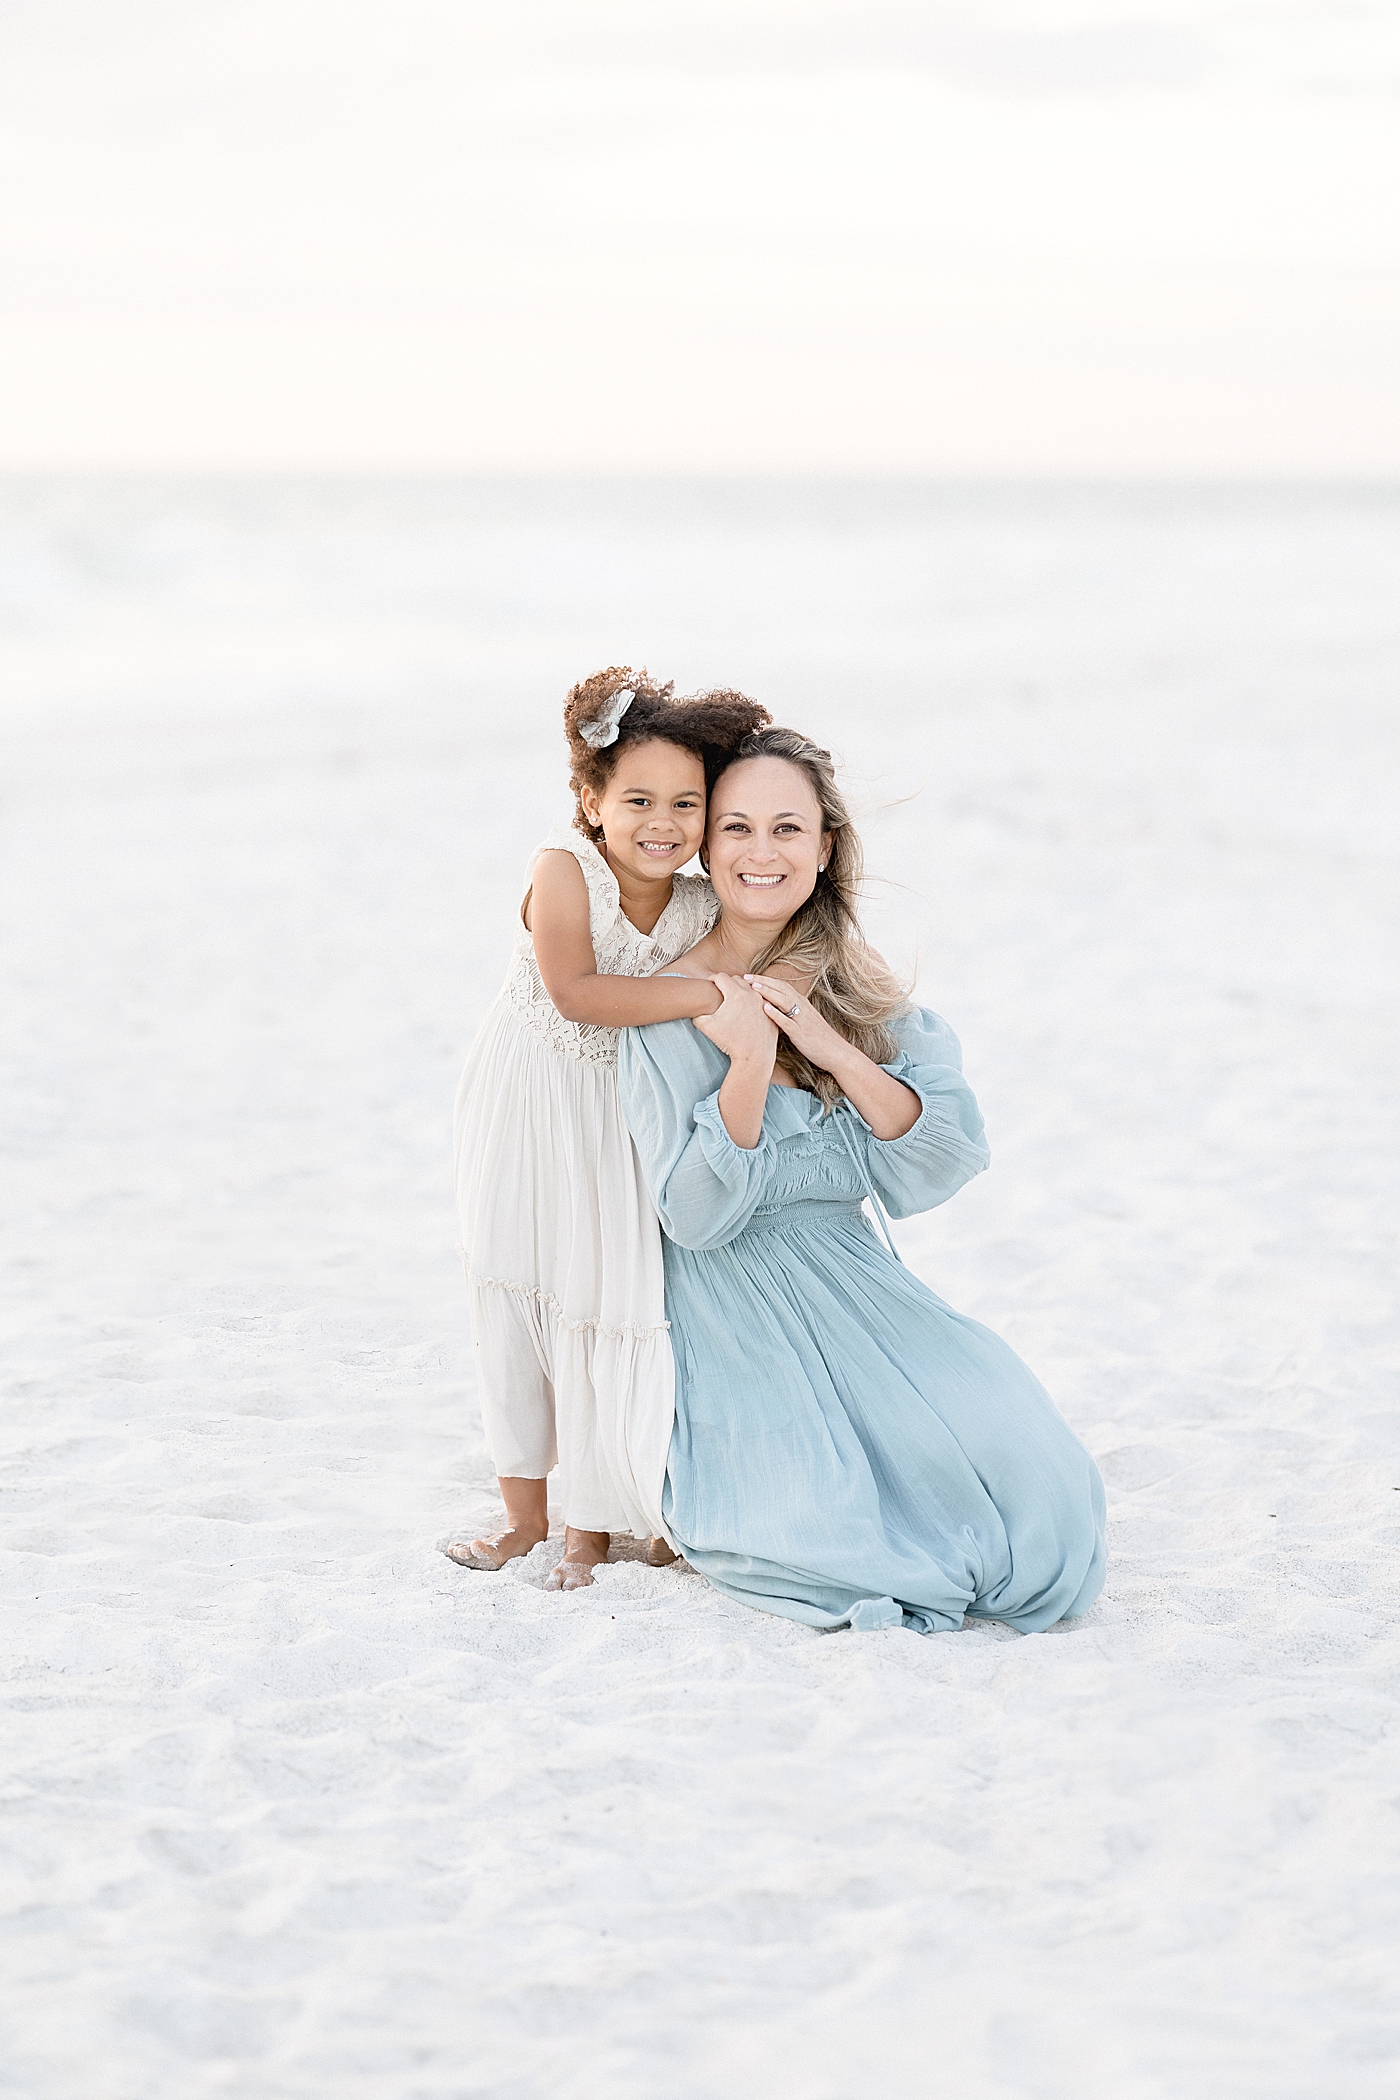 Mom and daughter on the beach together. Photo by Brittany Elise Photography.